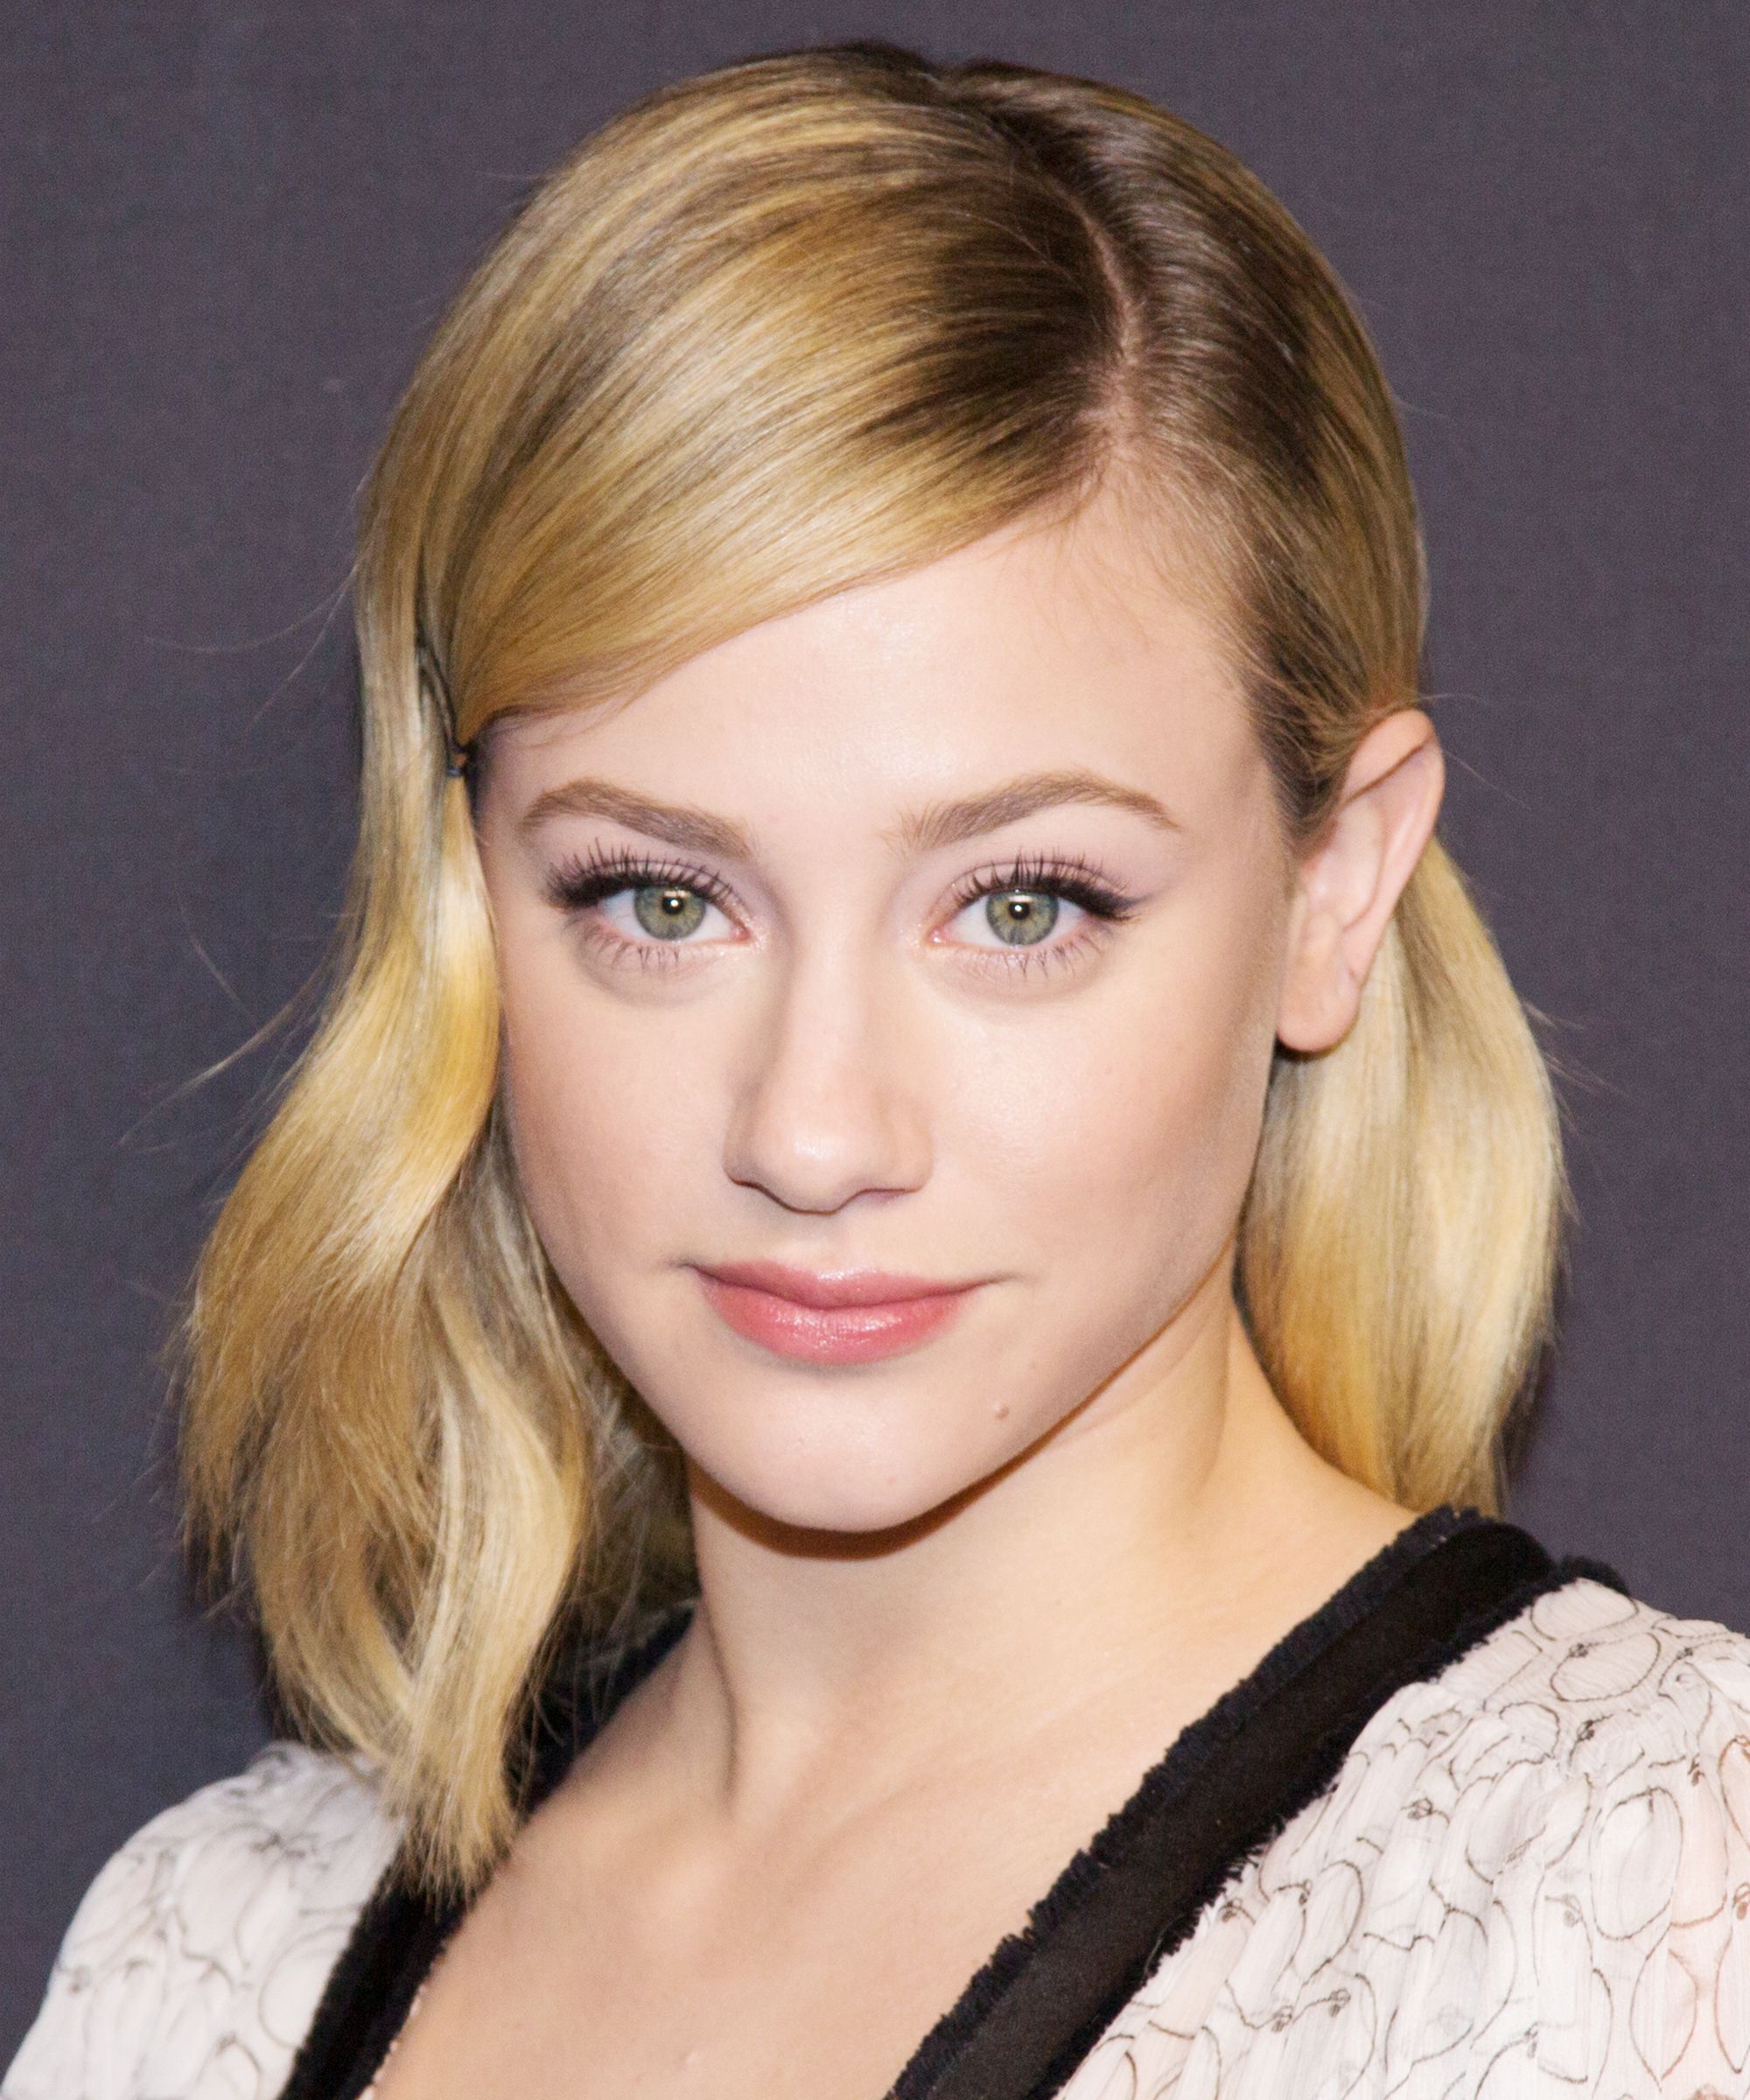 lili reinhart just got real about her struggle with acne